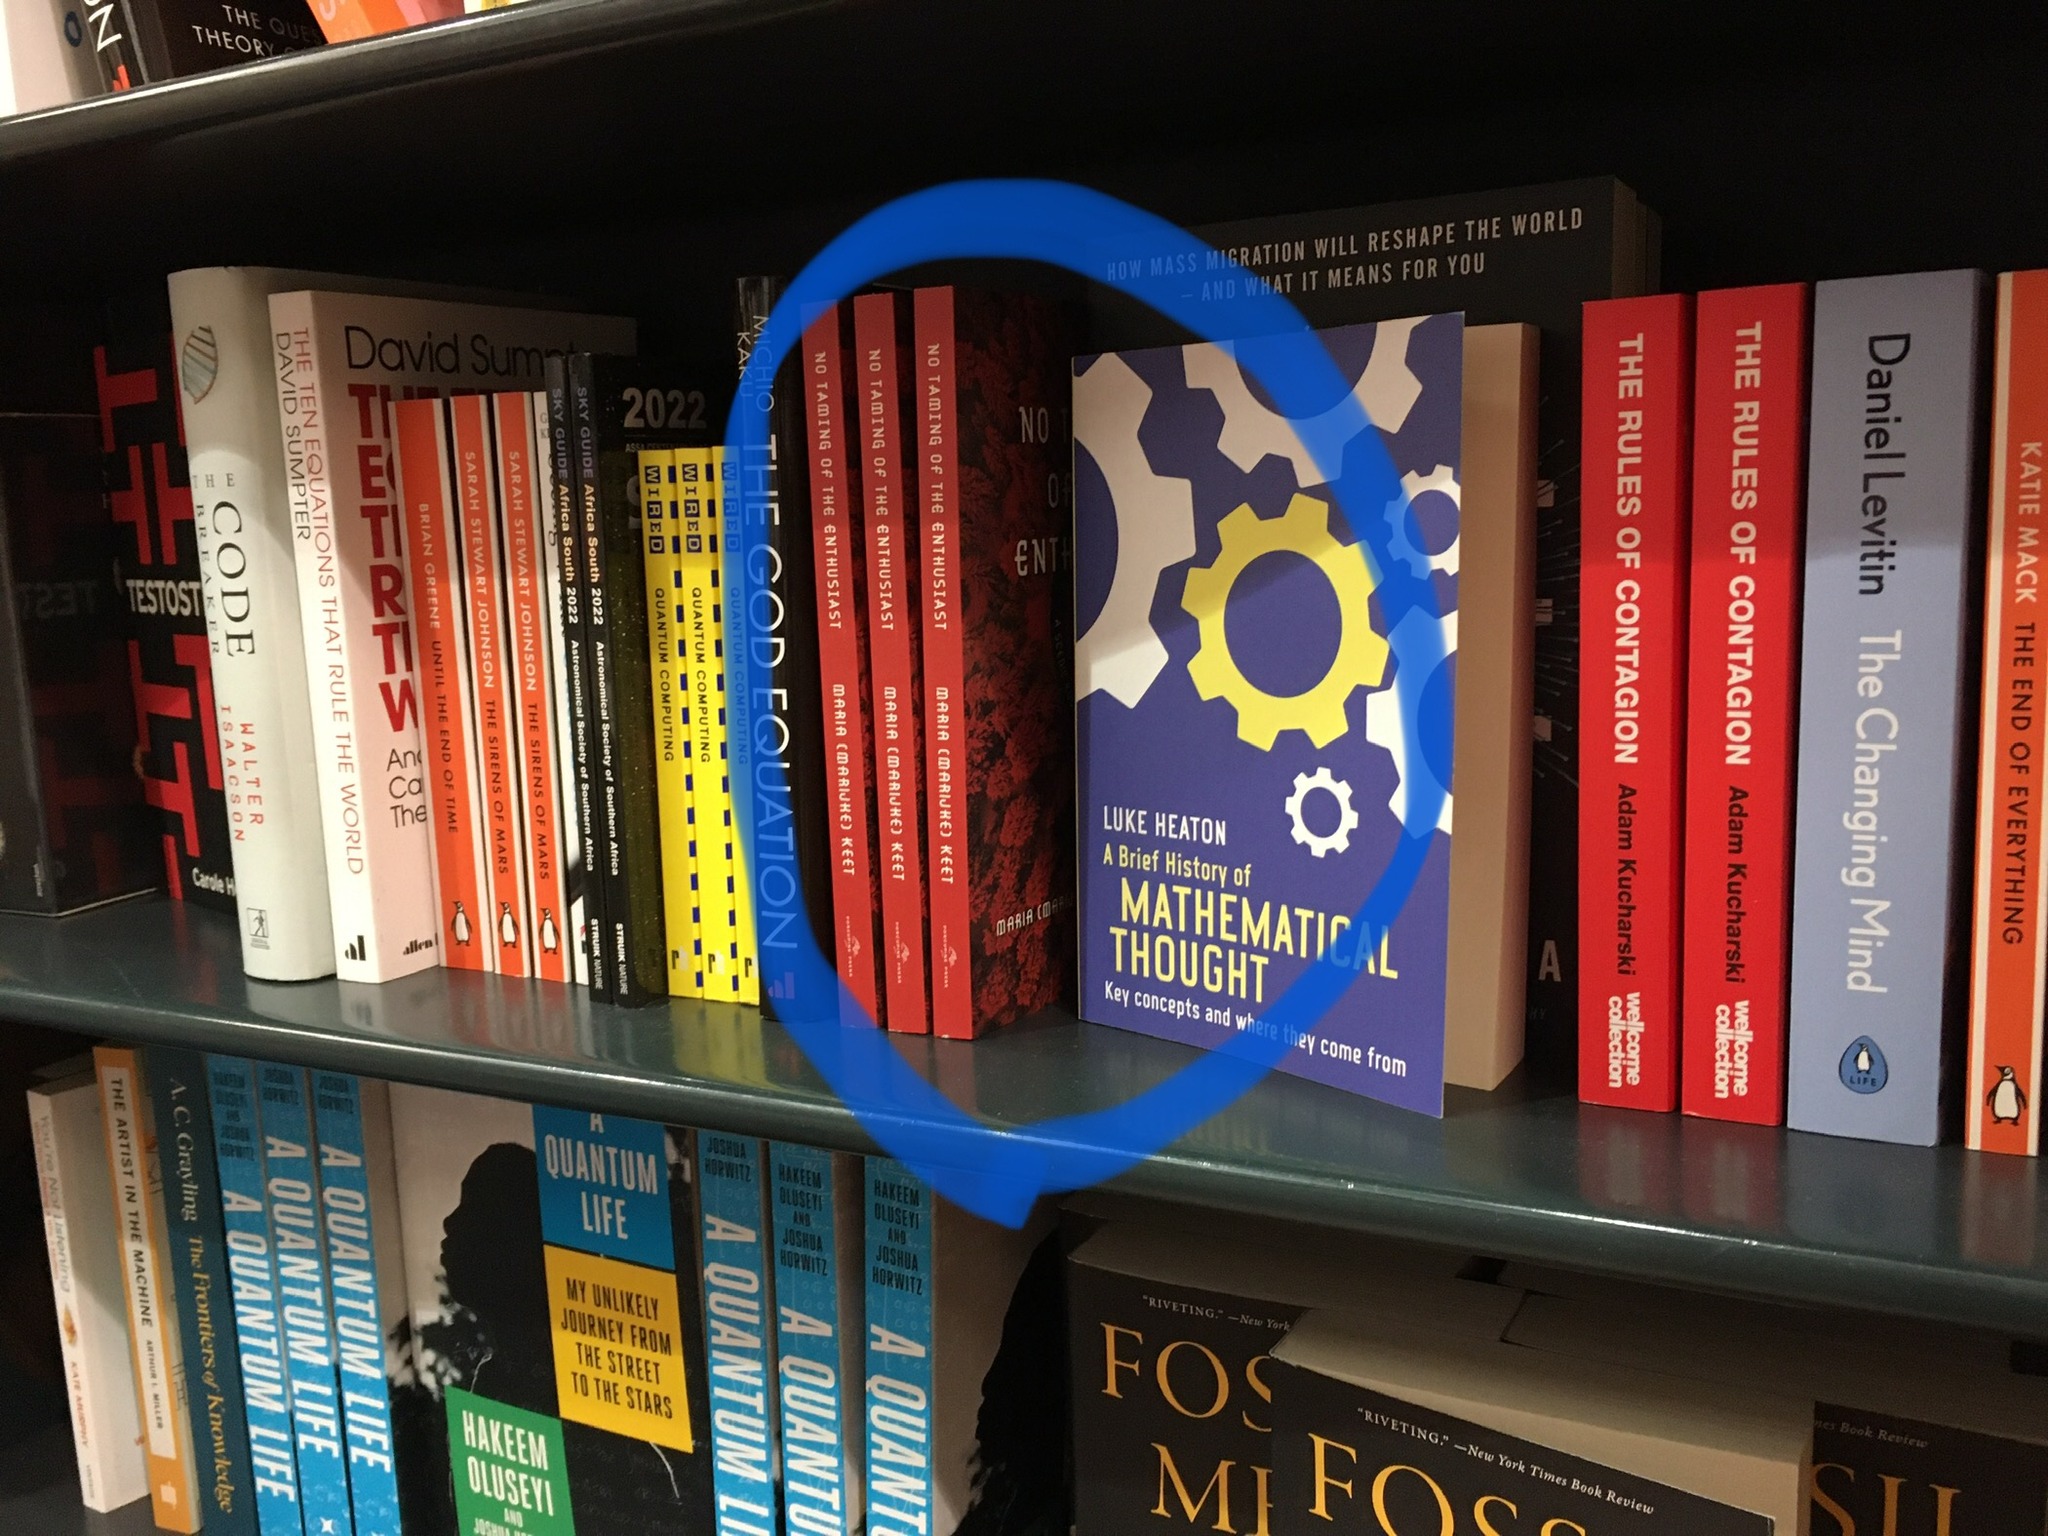 photo of the book in the EB bookshop